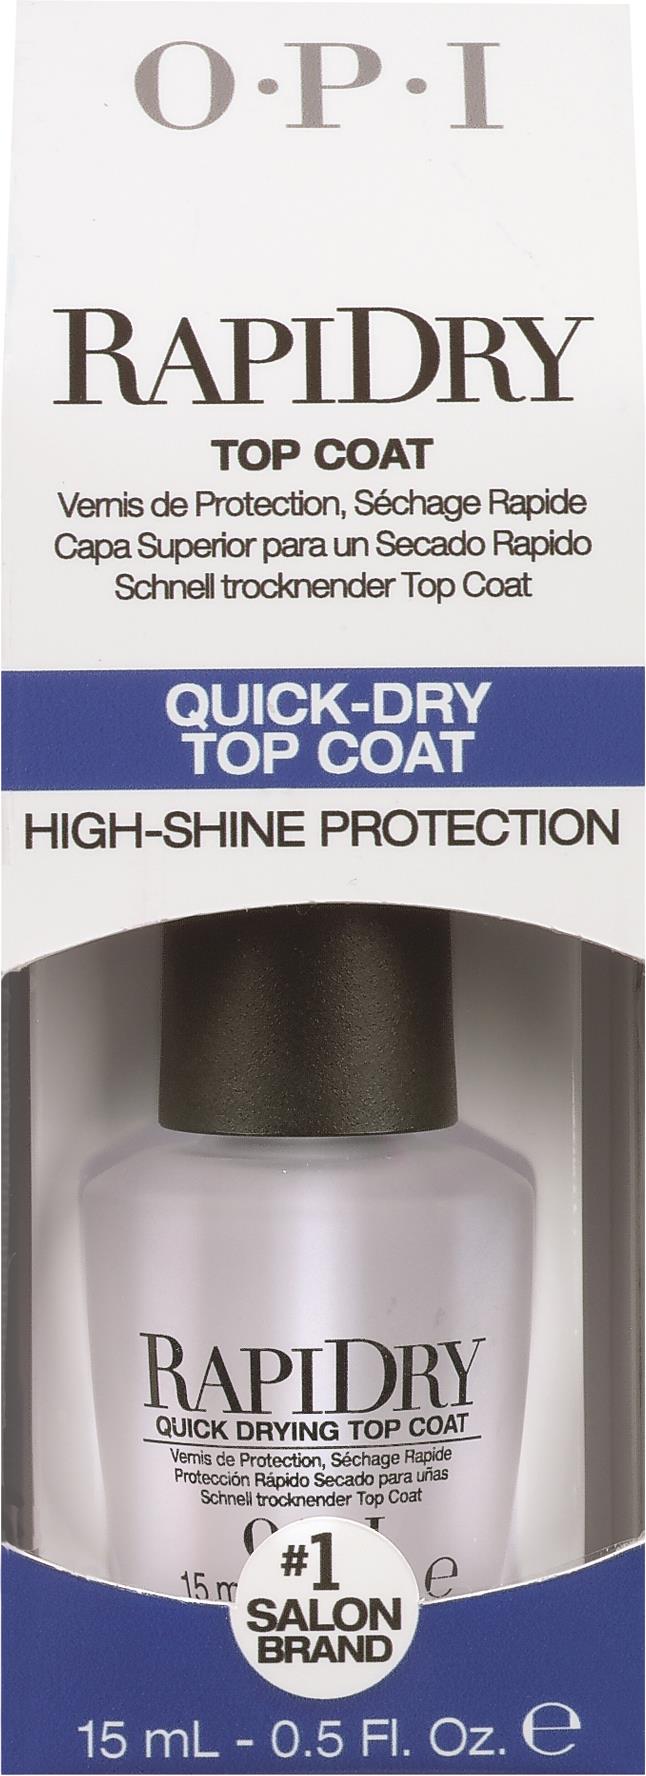 OPI RapiDry Top Coat quick drying and high gloss in one